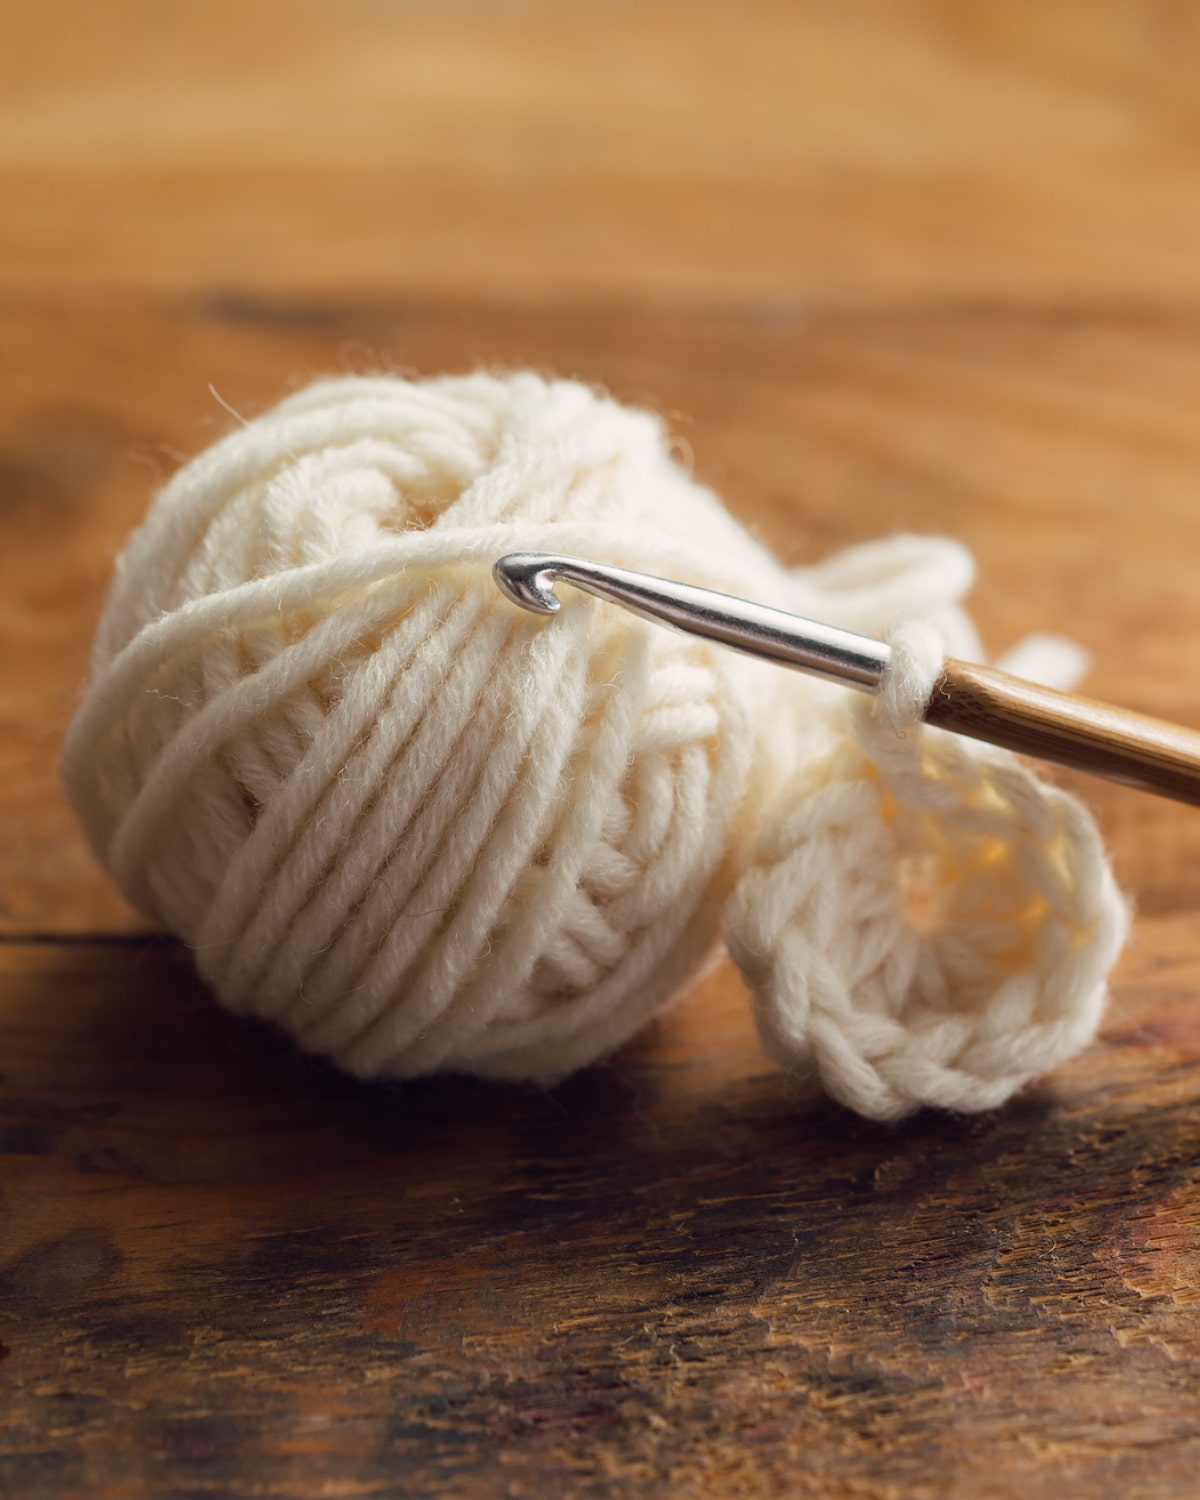 yarn and a crochet hook on a wooden table